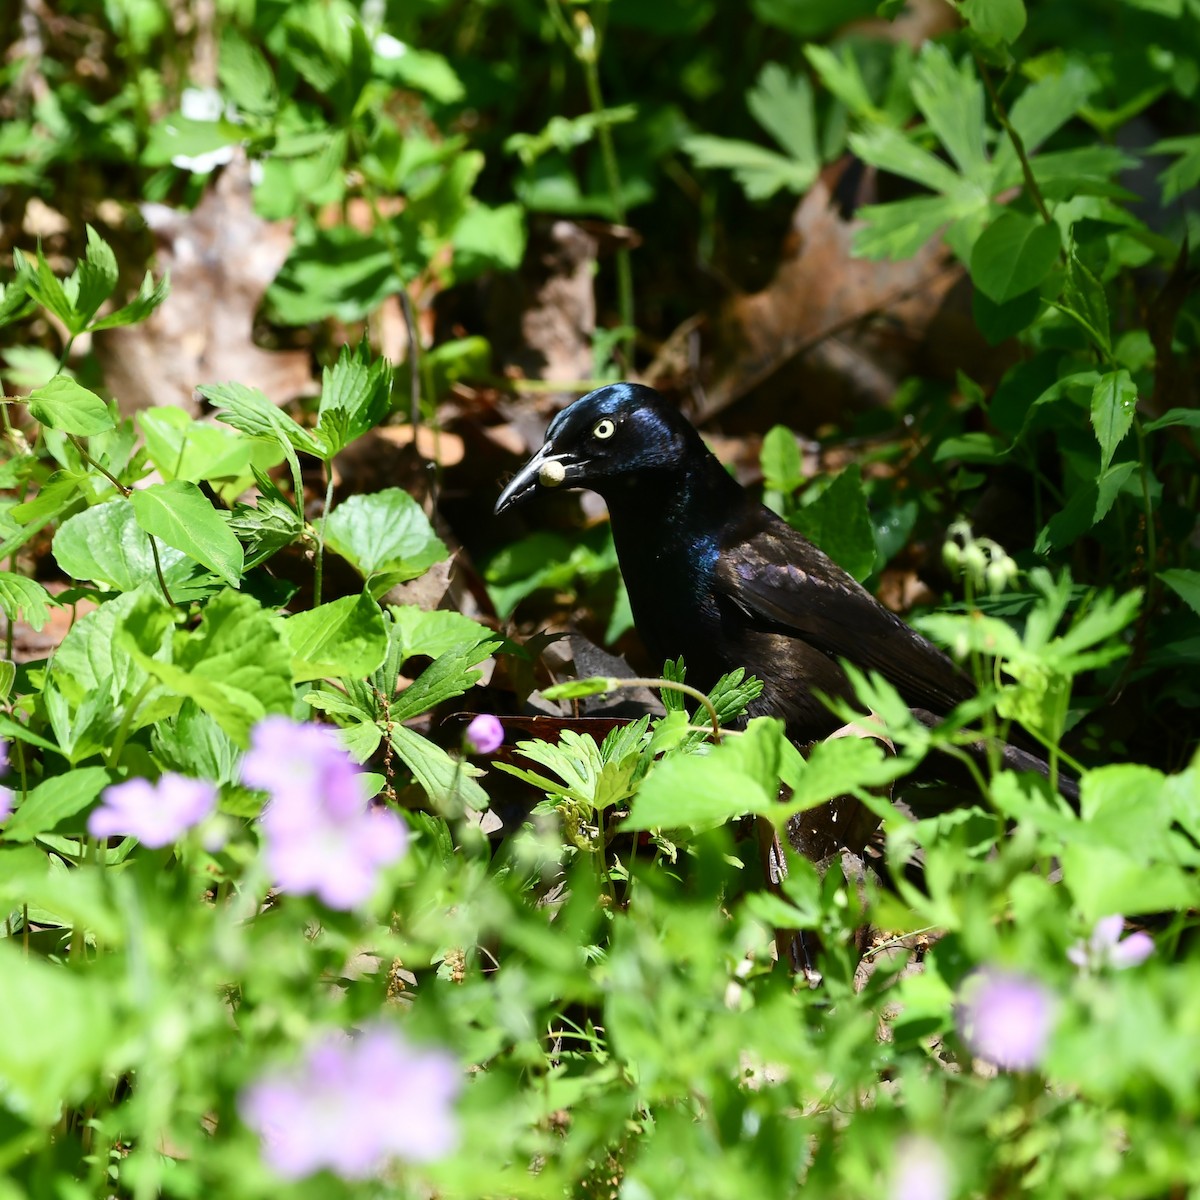 Common Grackle - Kevin Kelly